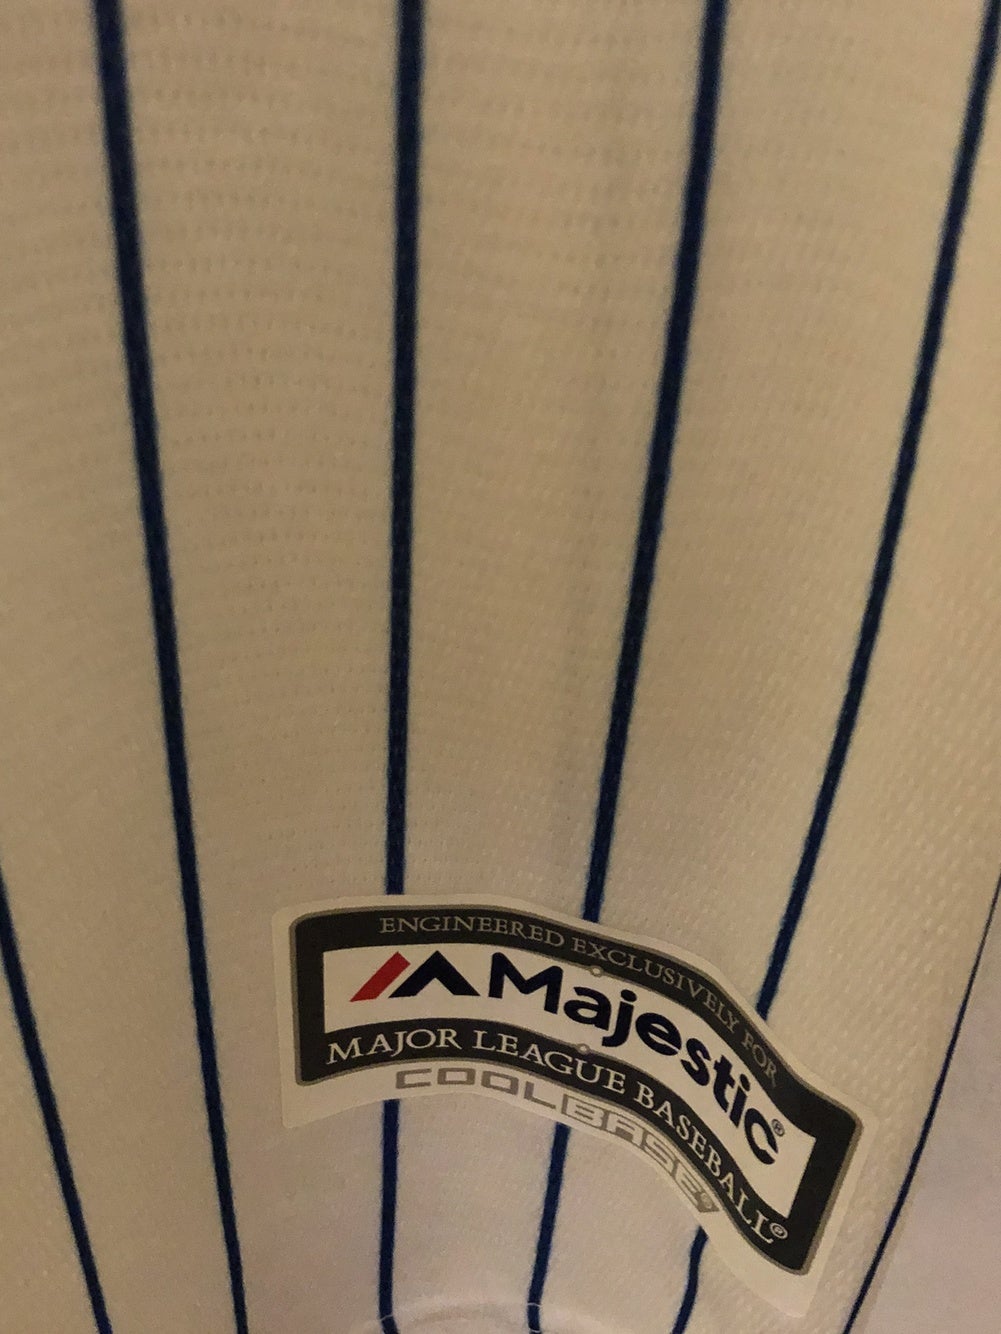  Majestic Chicago Cubs Cool Base Pinstripe Tackle Twill  Baseball Jersey (XX-Large) : Sports & Outdoors